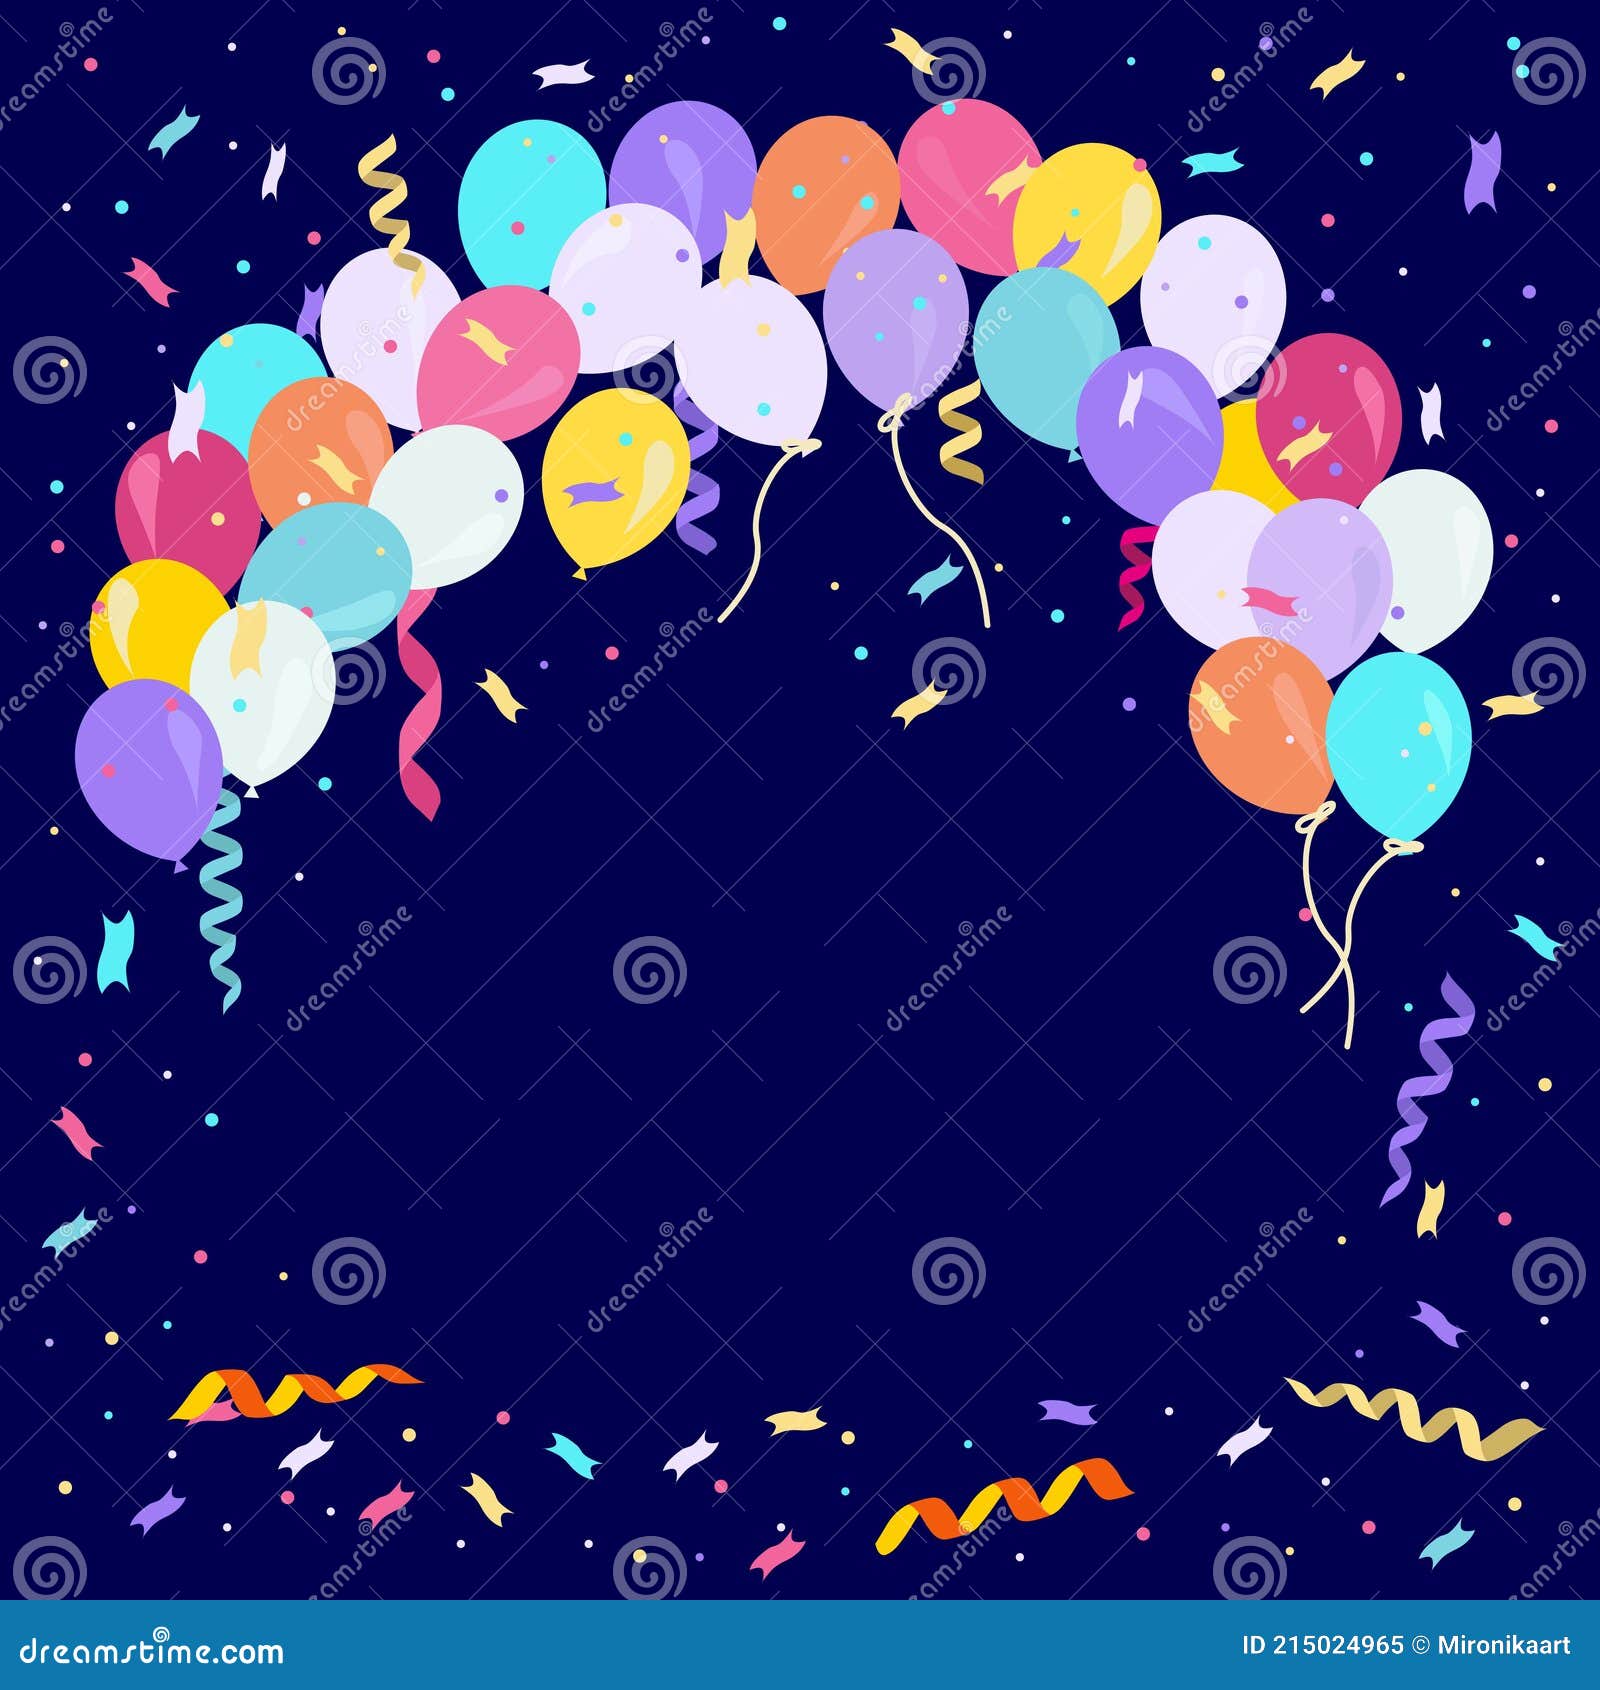 Confetti, curling ribbon, birthday, streamers, party - free image from